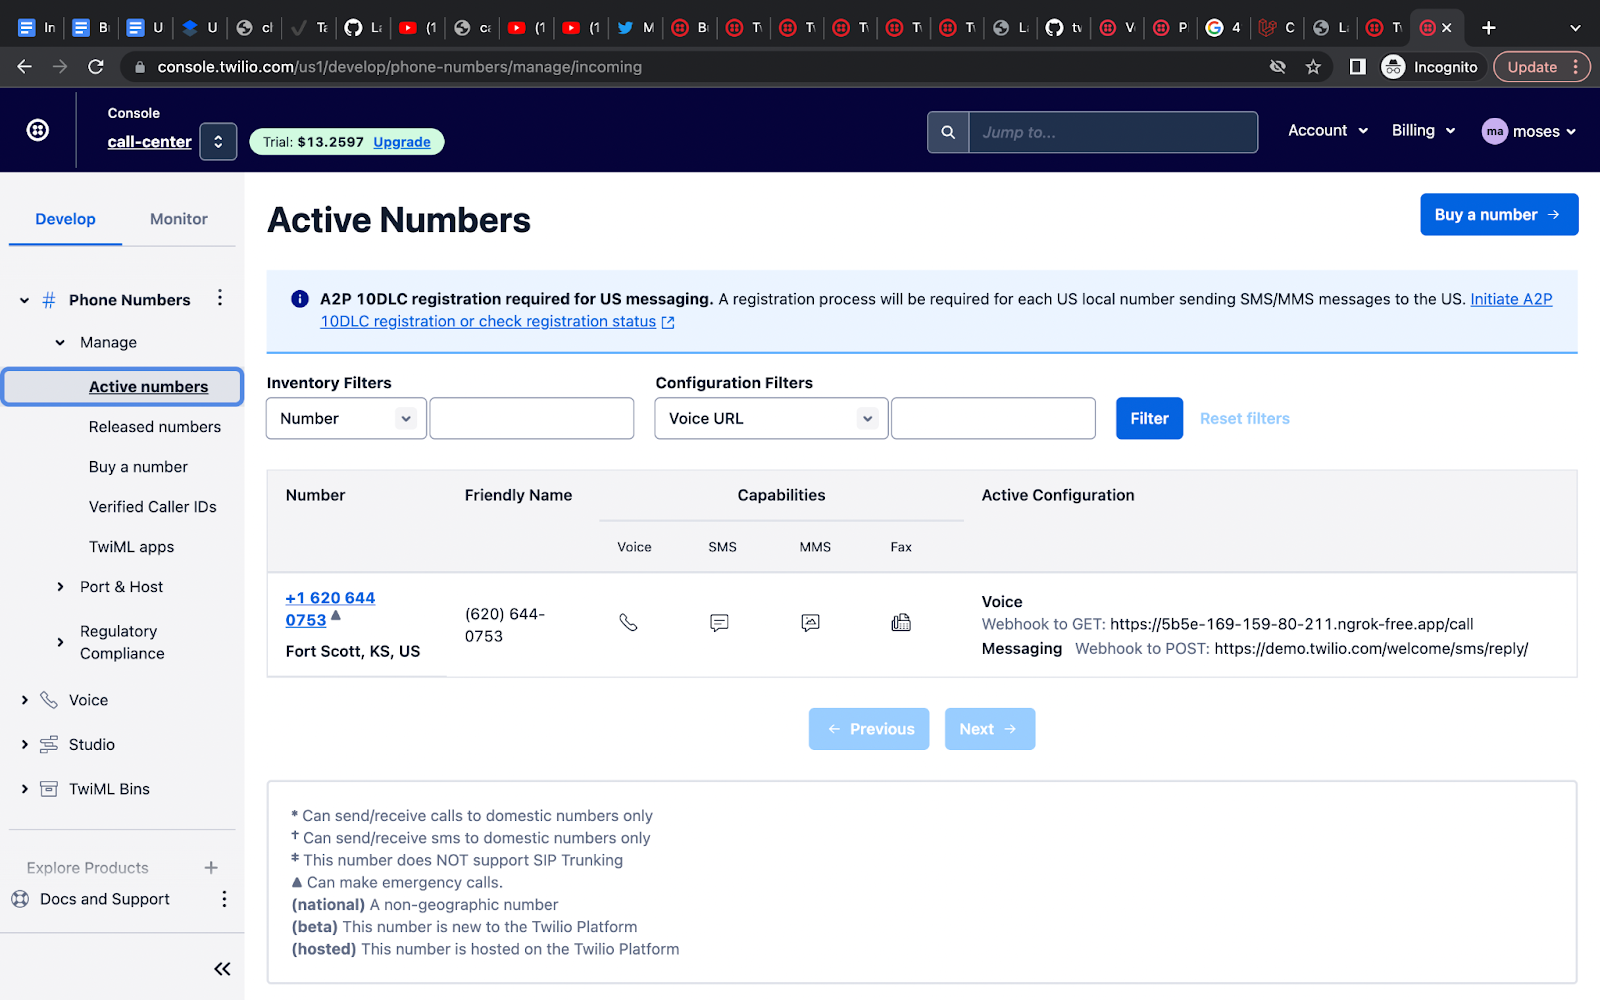 The Twilio Active Numbers section of the Twilio Console